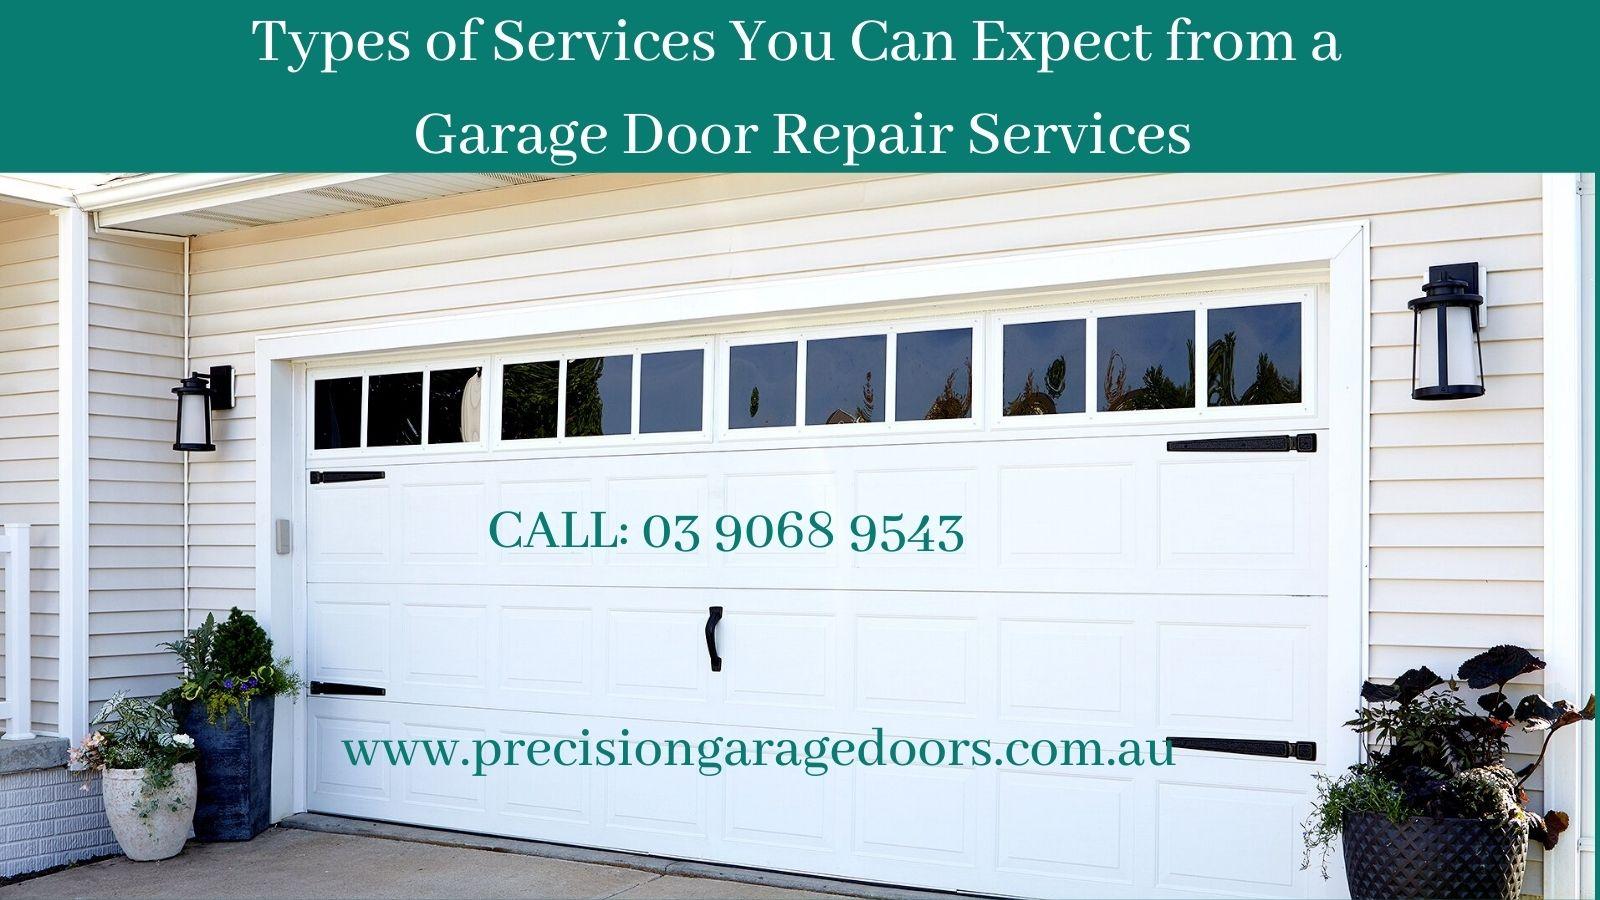 Types of Services You Can Expect from a Garage Door Repair Services